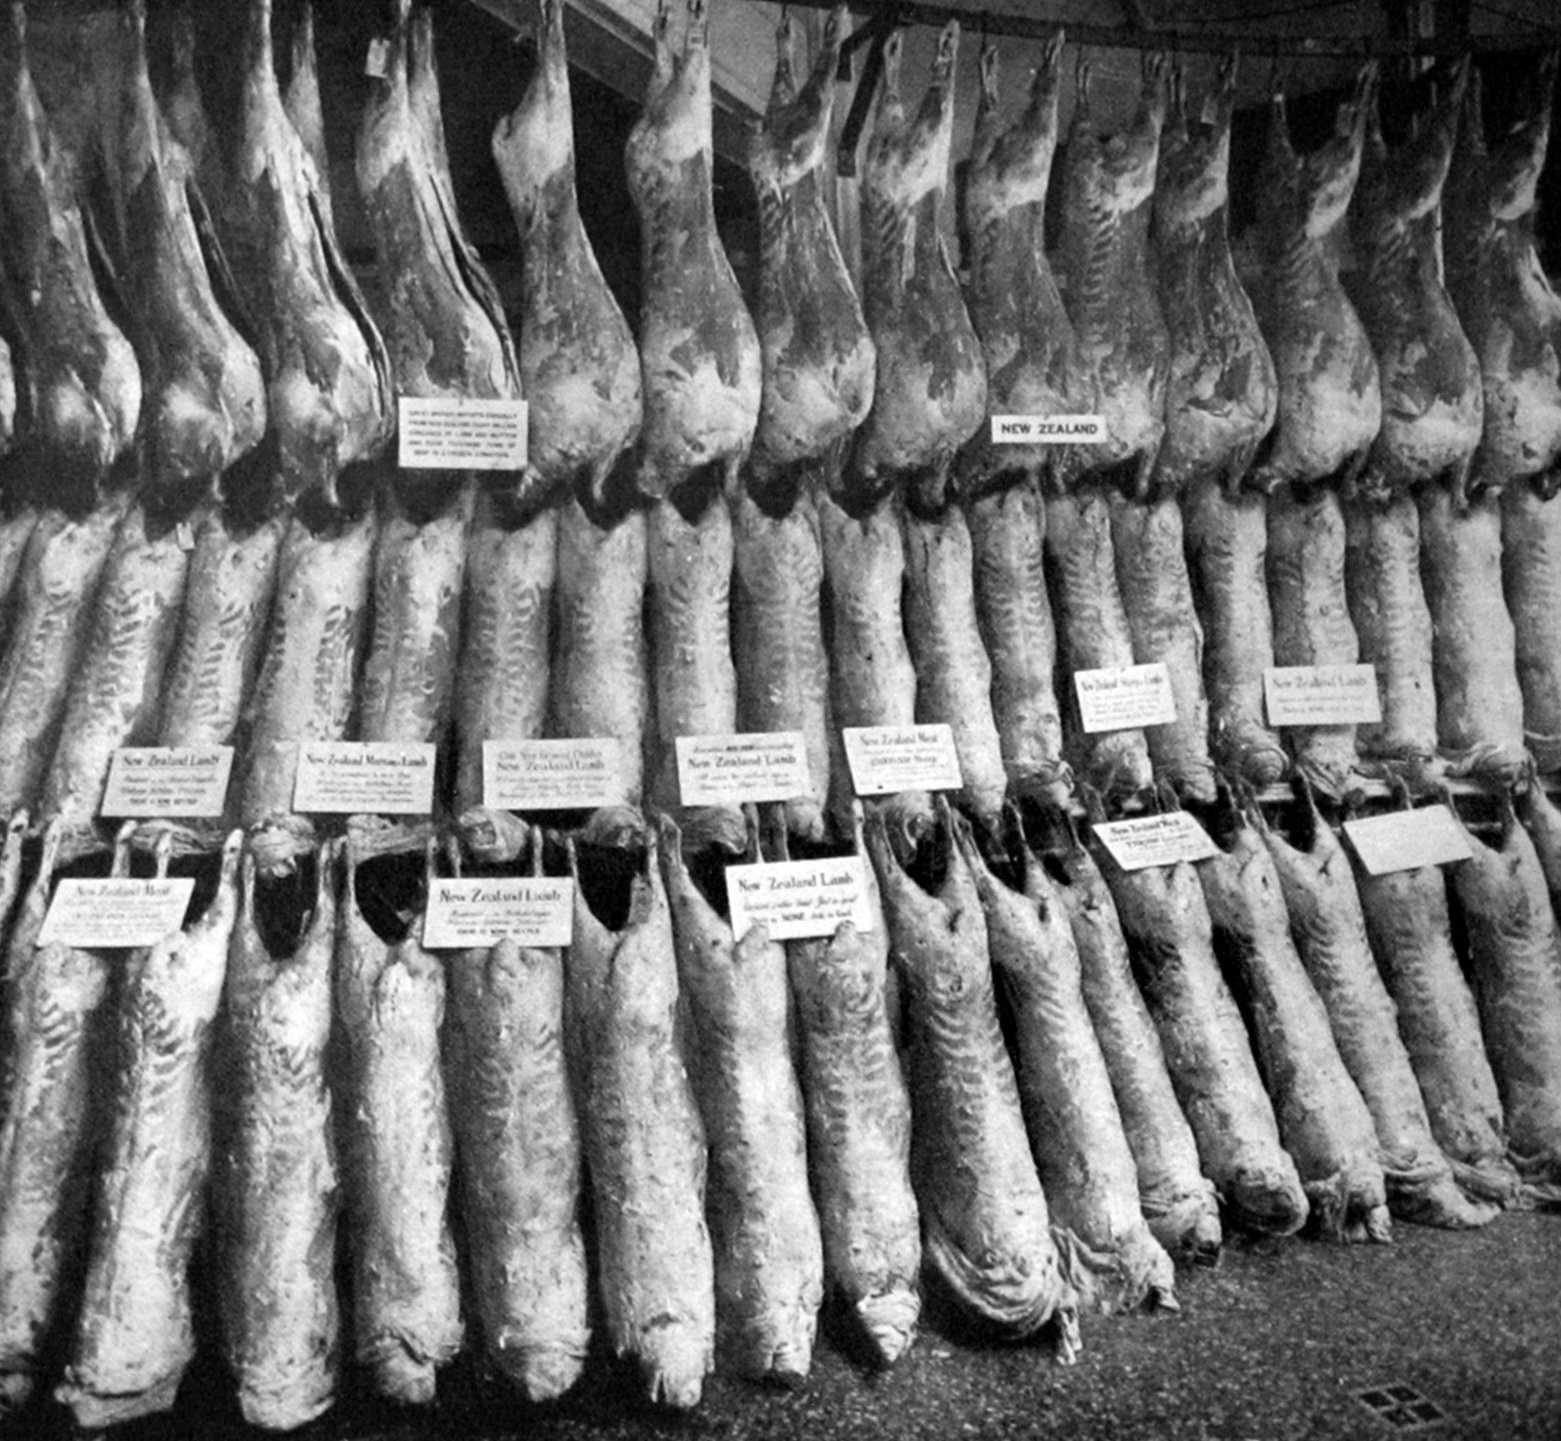 A display of New Zealand meat in London, at the Army and Navy Stores, to mark British Empire...